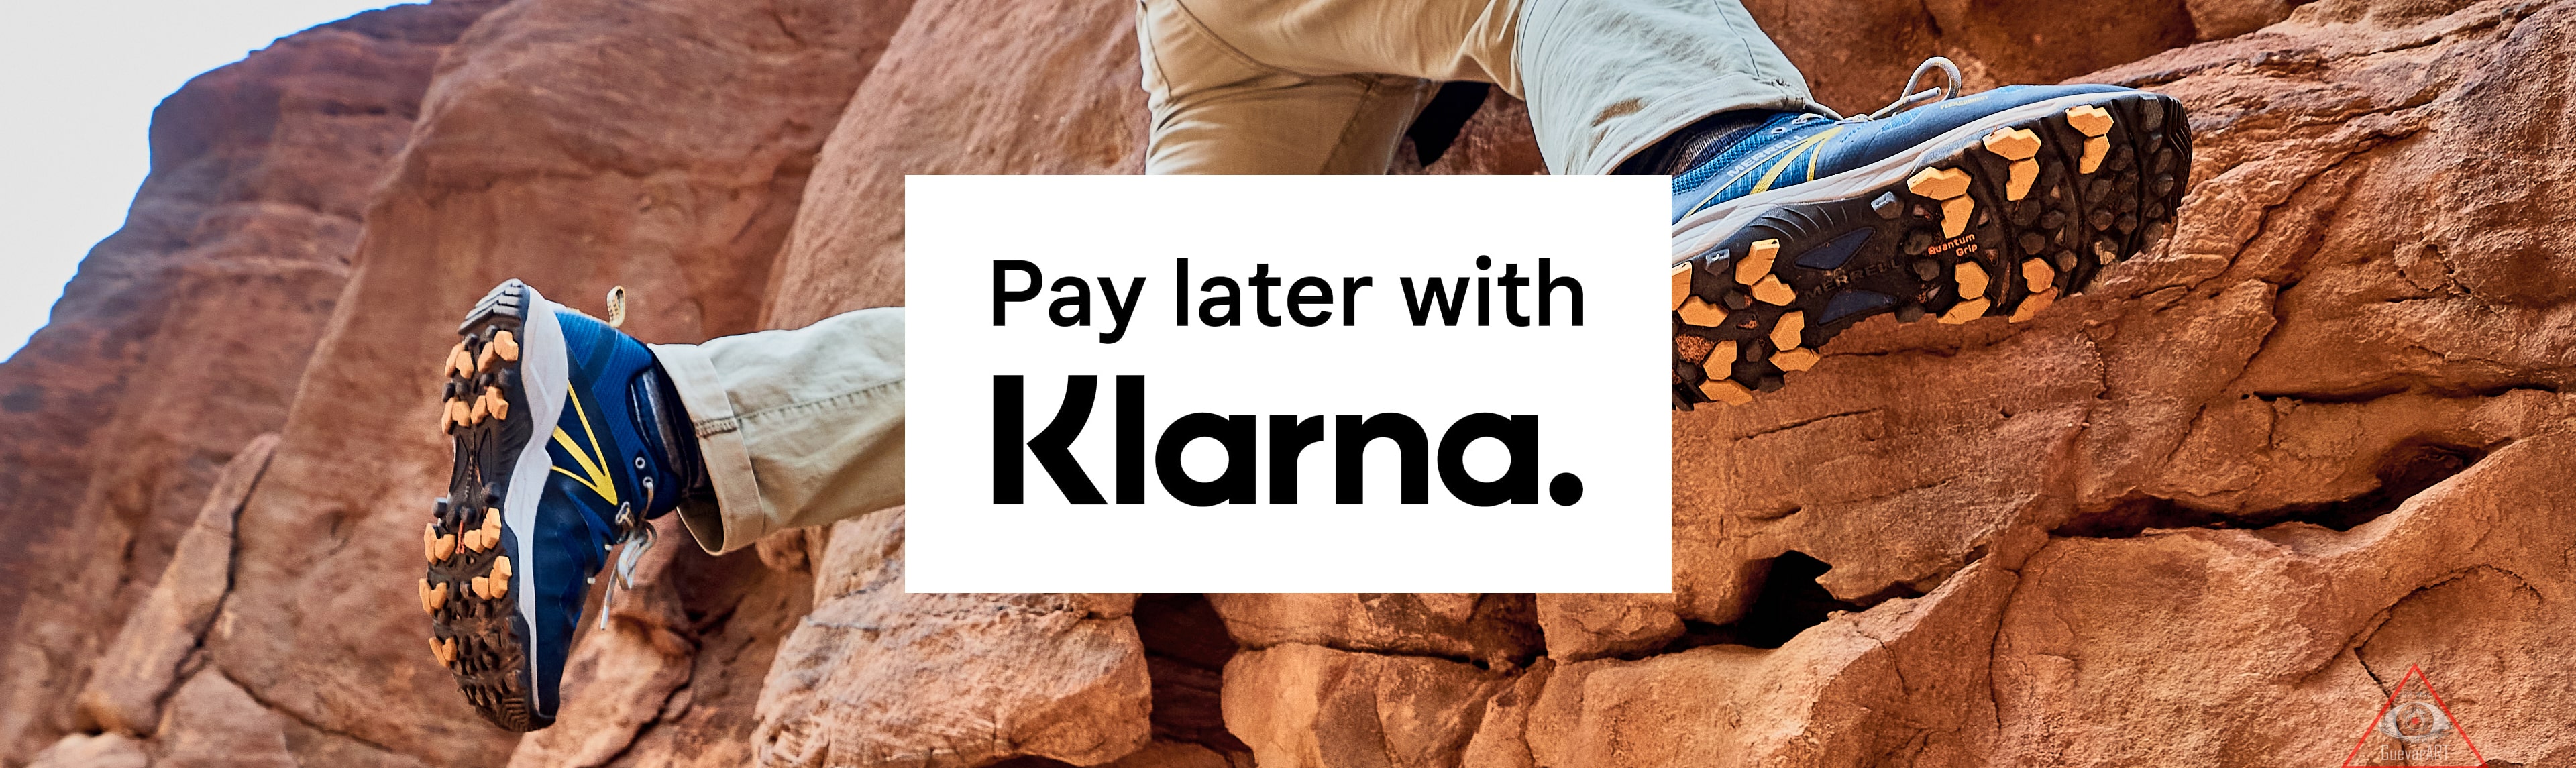 Pay later with Klarna.